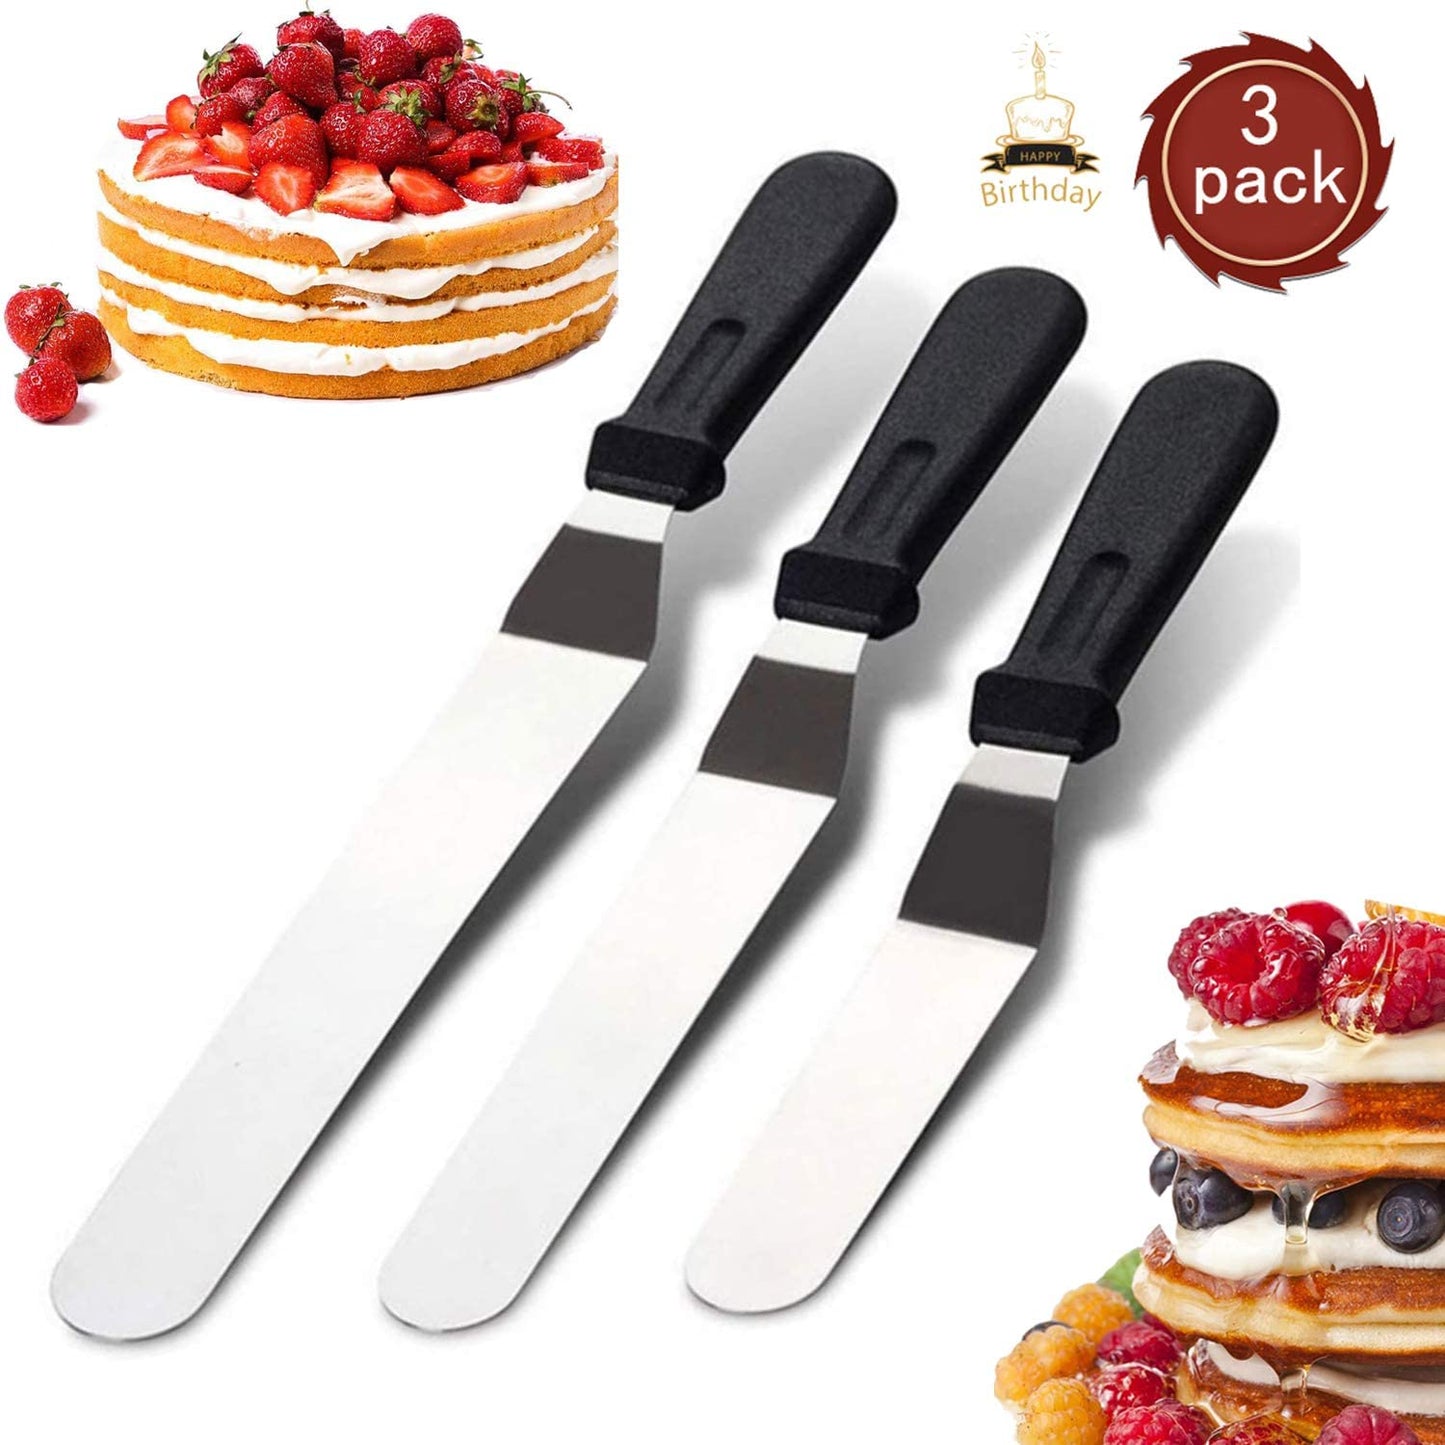 Angled Icing Spatula, Stainless Steel Offset Spatula, Cake Spatula Set of 3 Black 6, 8 10 inch Blade